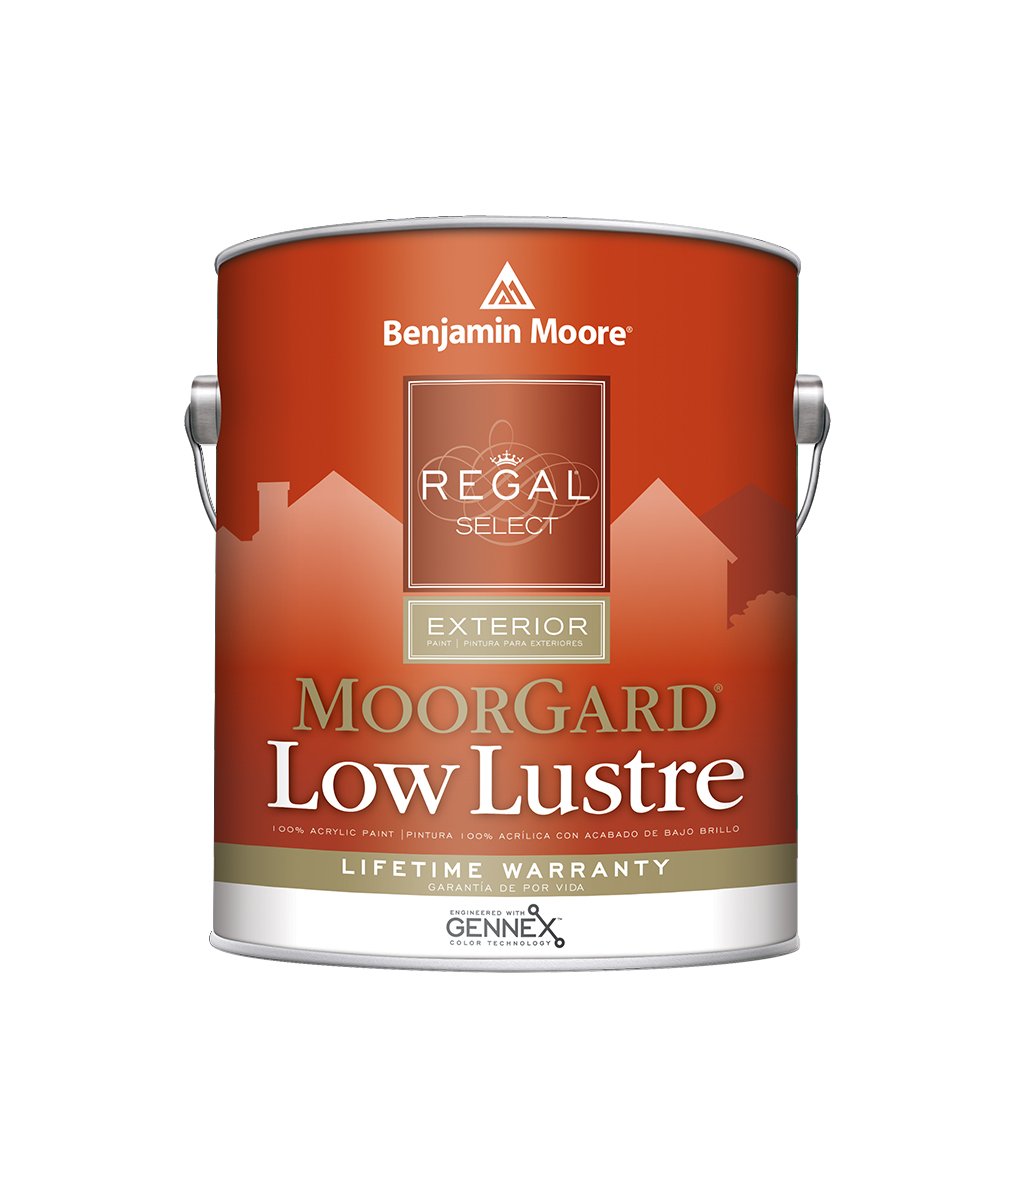 Benjamin Moore Regal Select Low Lustre Exterior Paint available at Catalina Paints